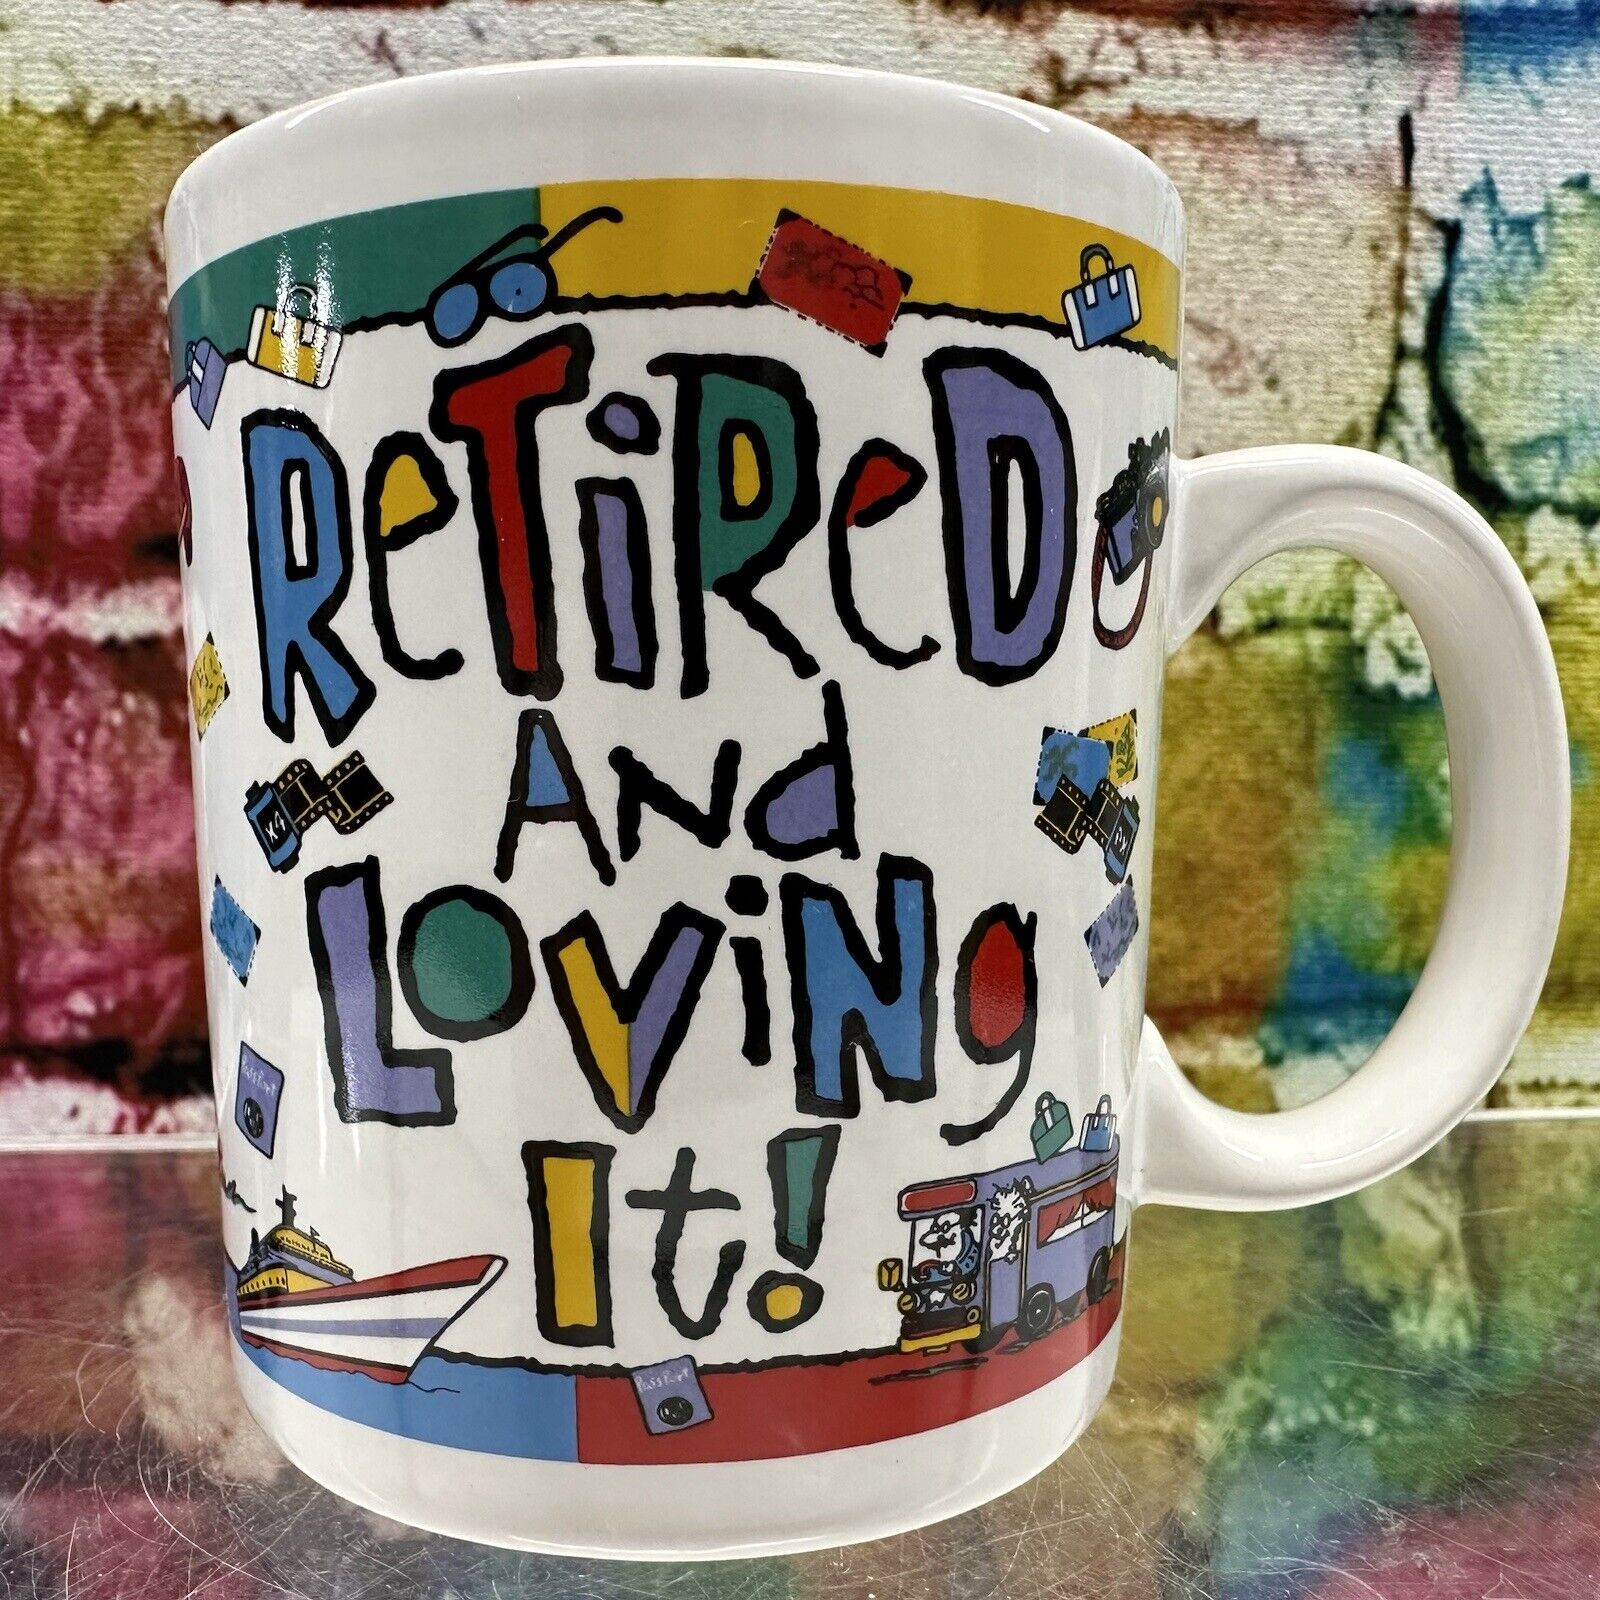 Retired And Loving It Coffee Mug Cup Retirement Gift Party Golf Fish Travel Fun